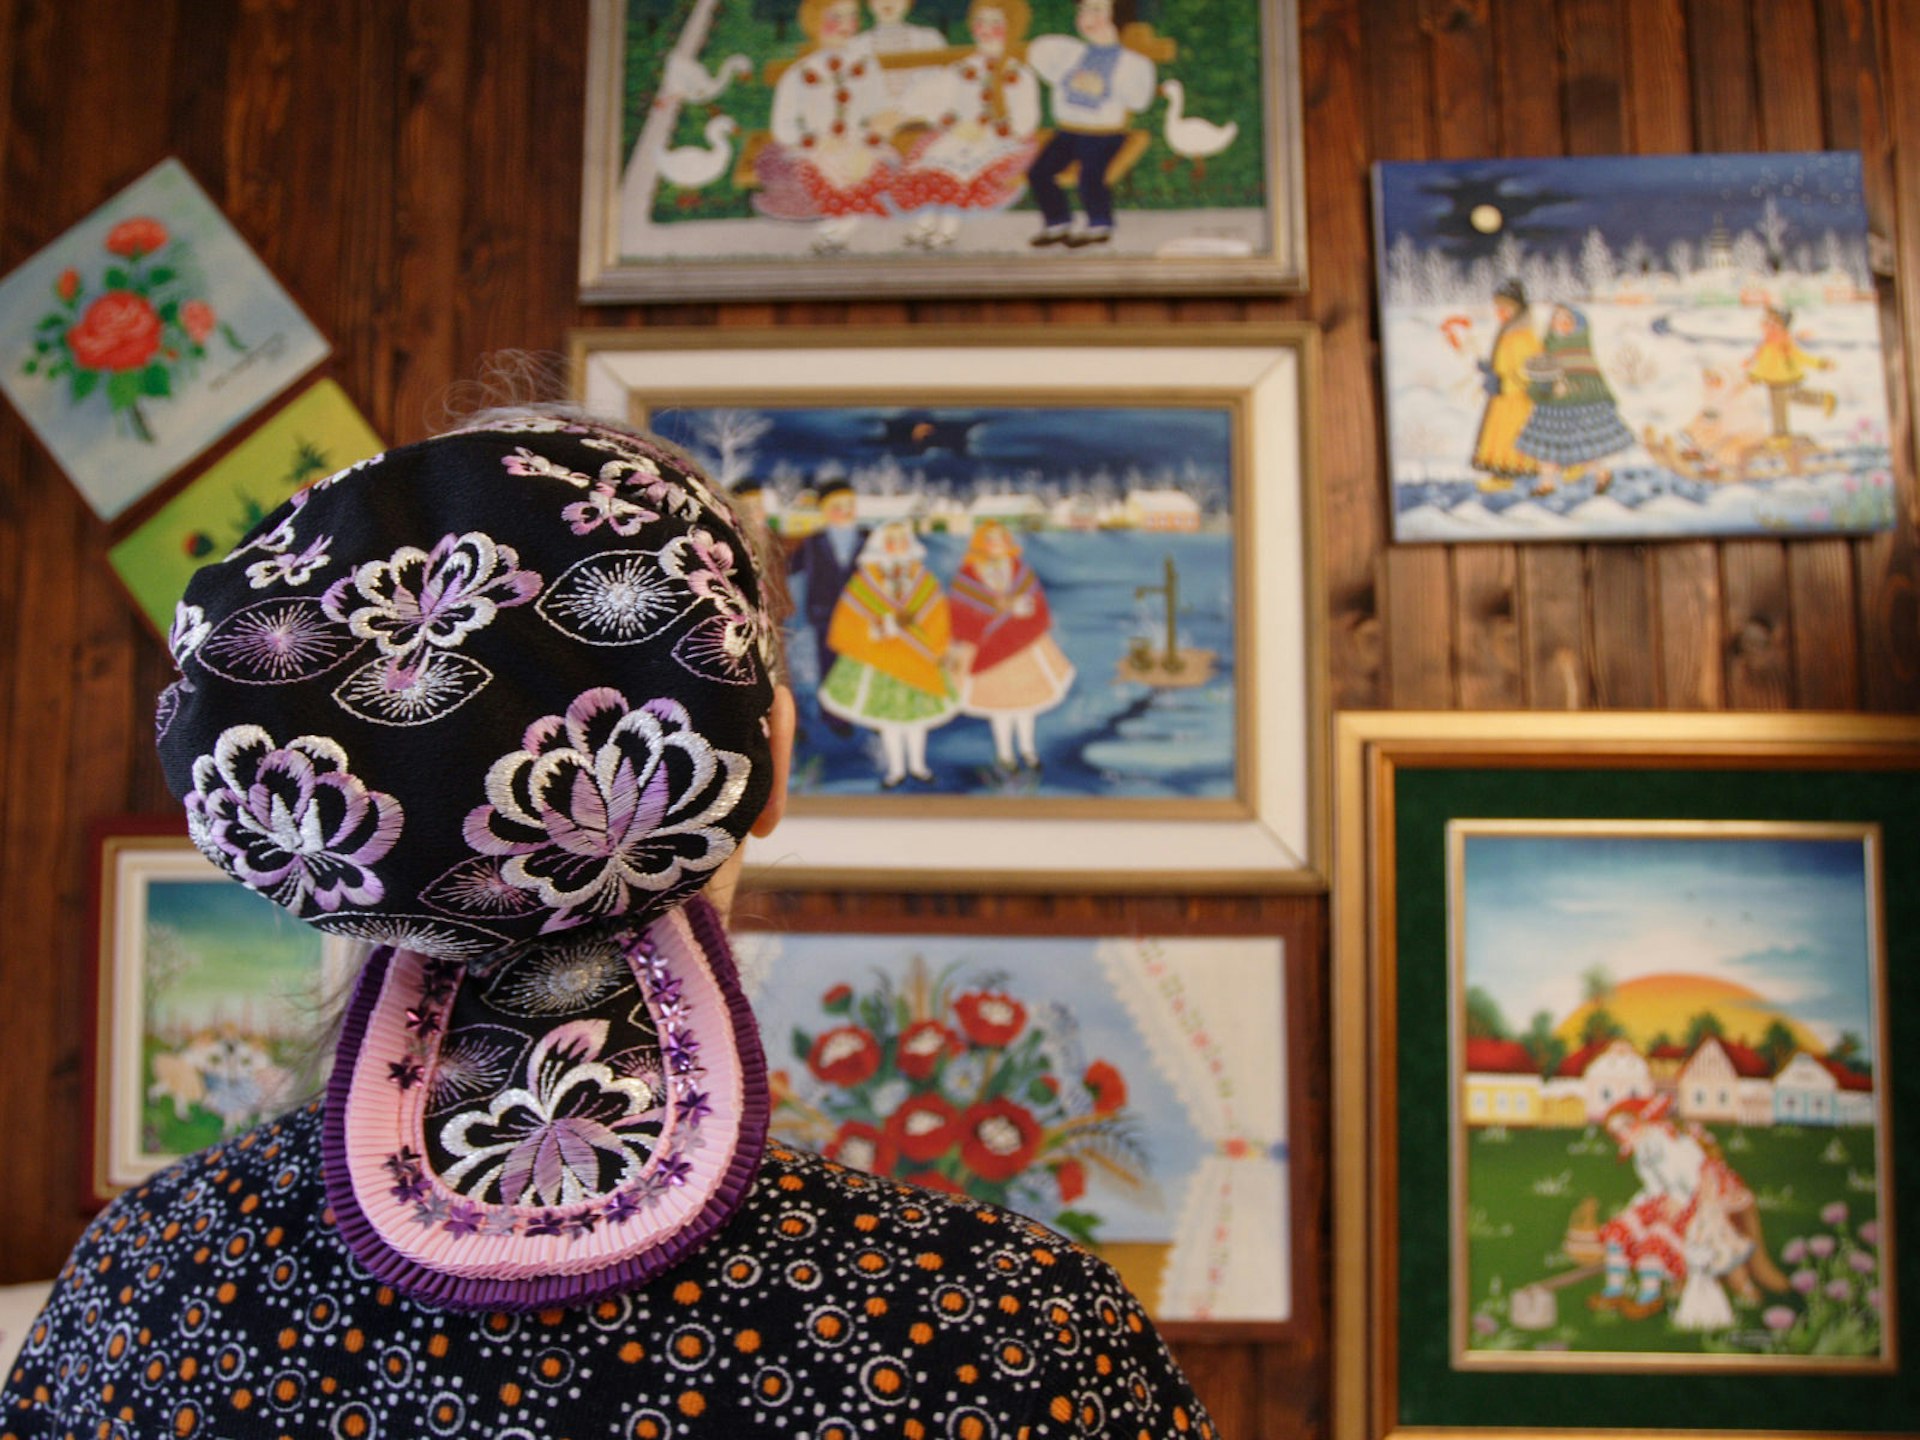 The colourful paintings at the Naive Art Gallery in Kovačica © courtesy of the Tourist Organisation of Kovačica